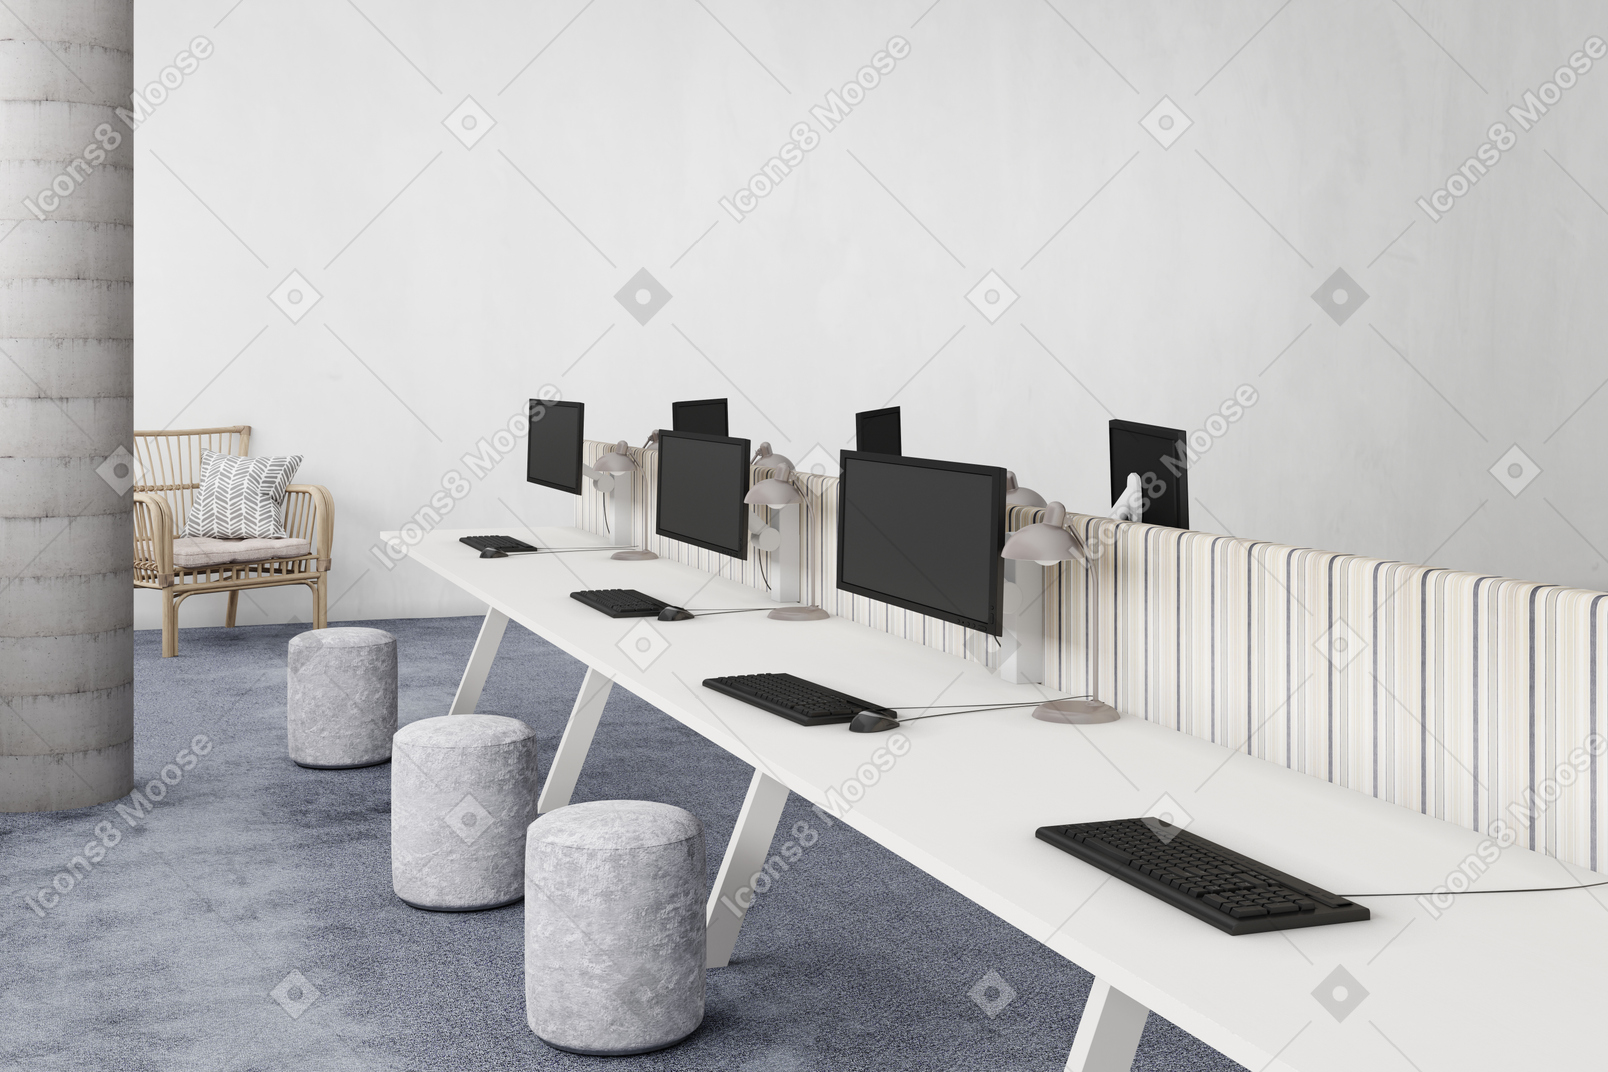 3501053 Modern Office Background Images Stock Photos  Vectors   Shutterstock